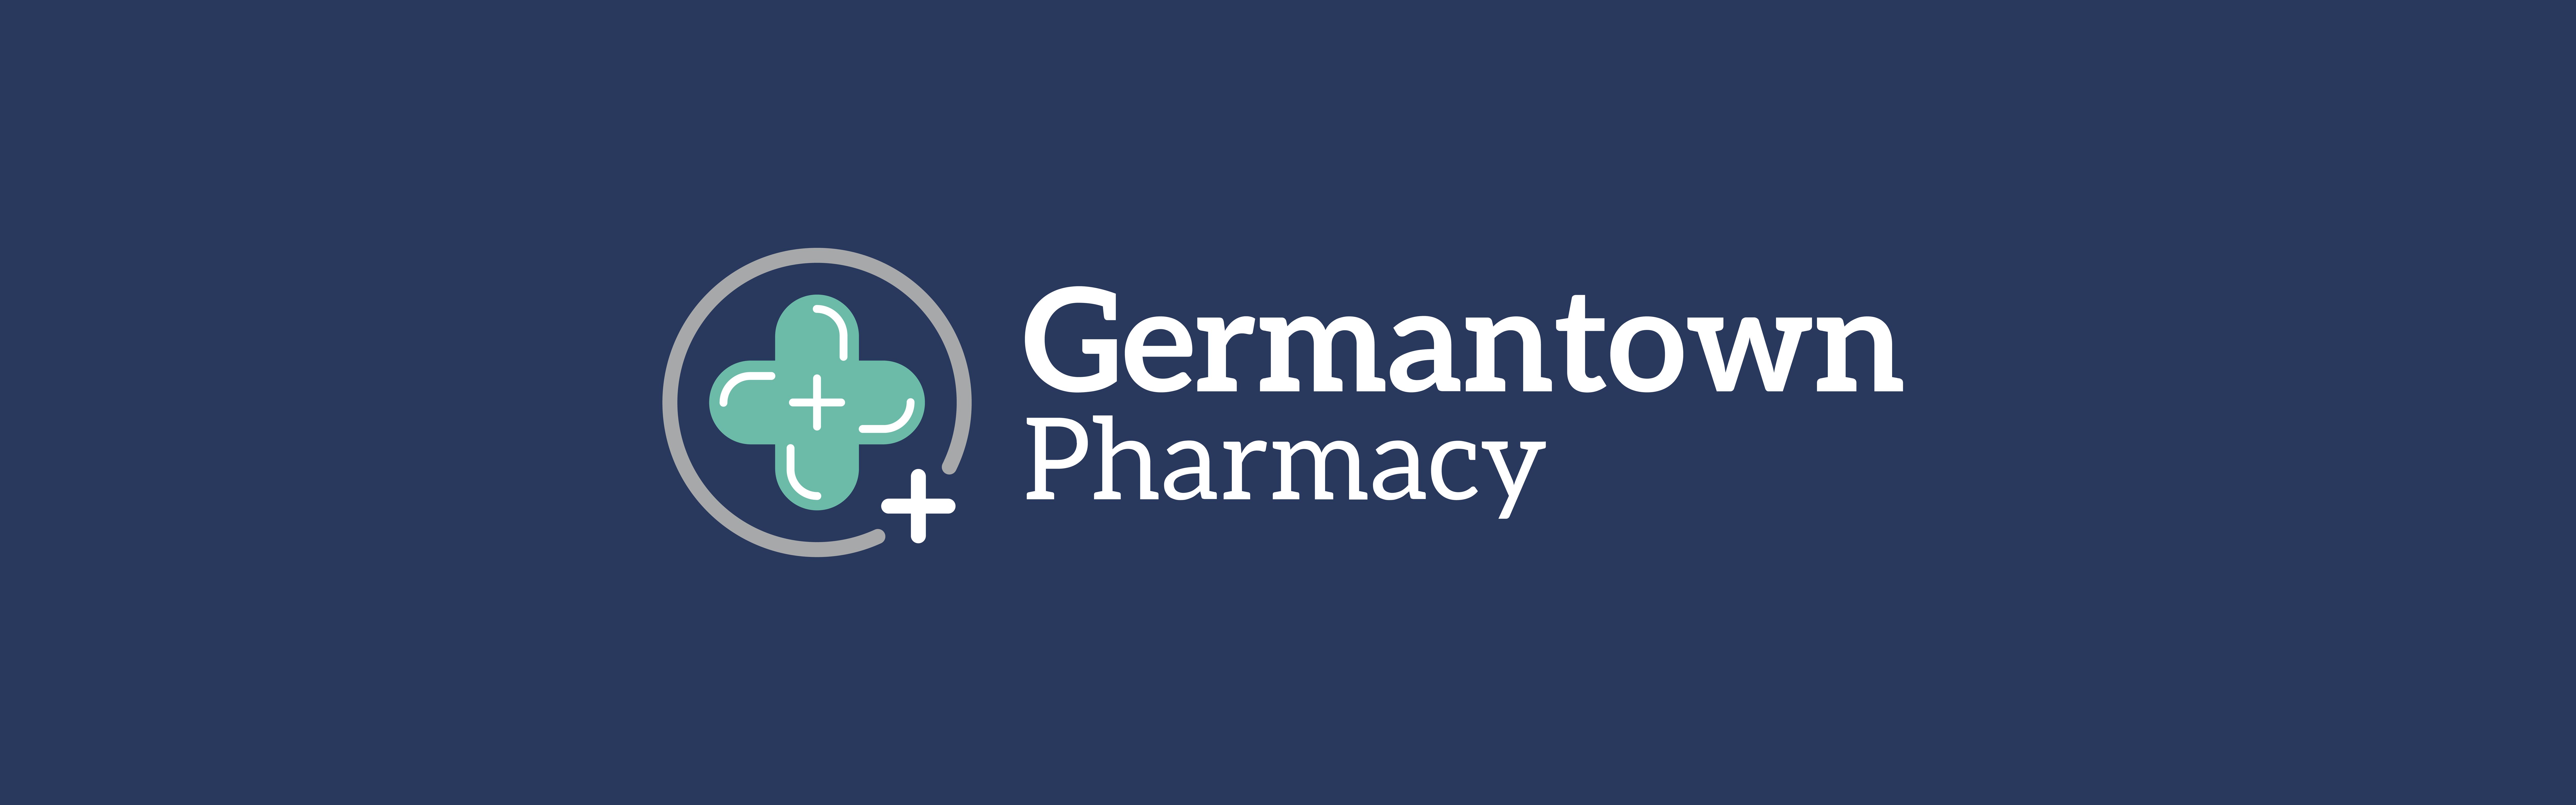 The image showcases a logo for Germantown Pharmacy, featuring a green cross with a white outline, synonymous with medical and pharmacy services, next to the pharmacy name in white text on a dark background.